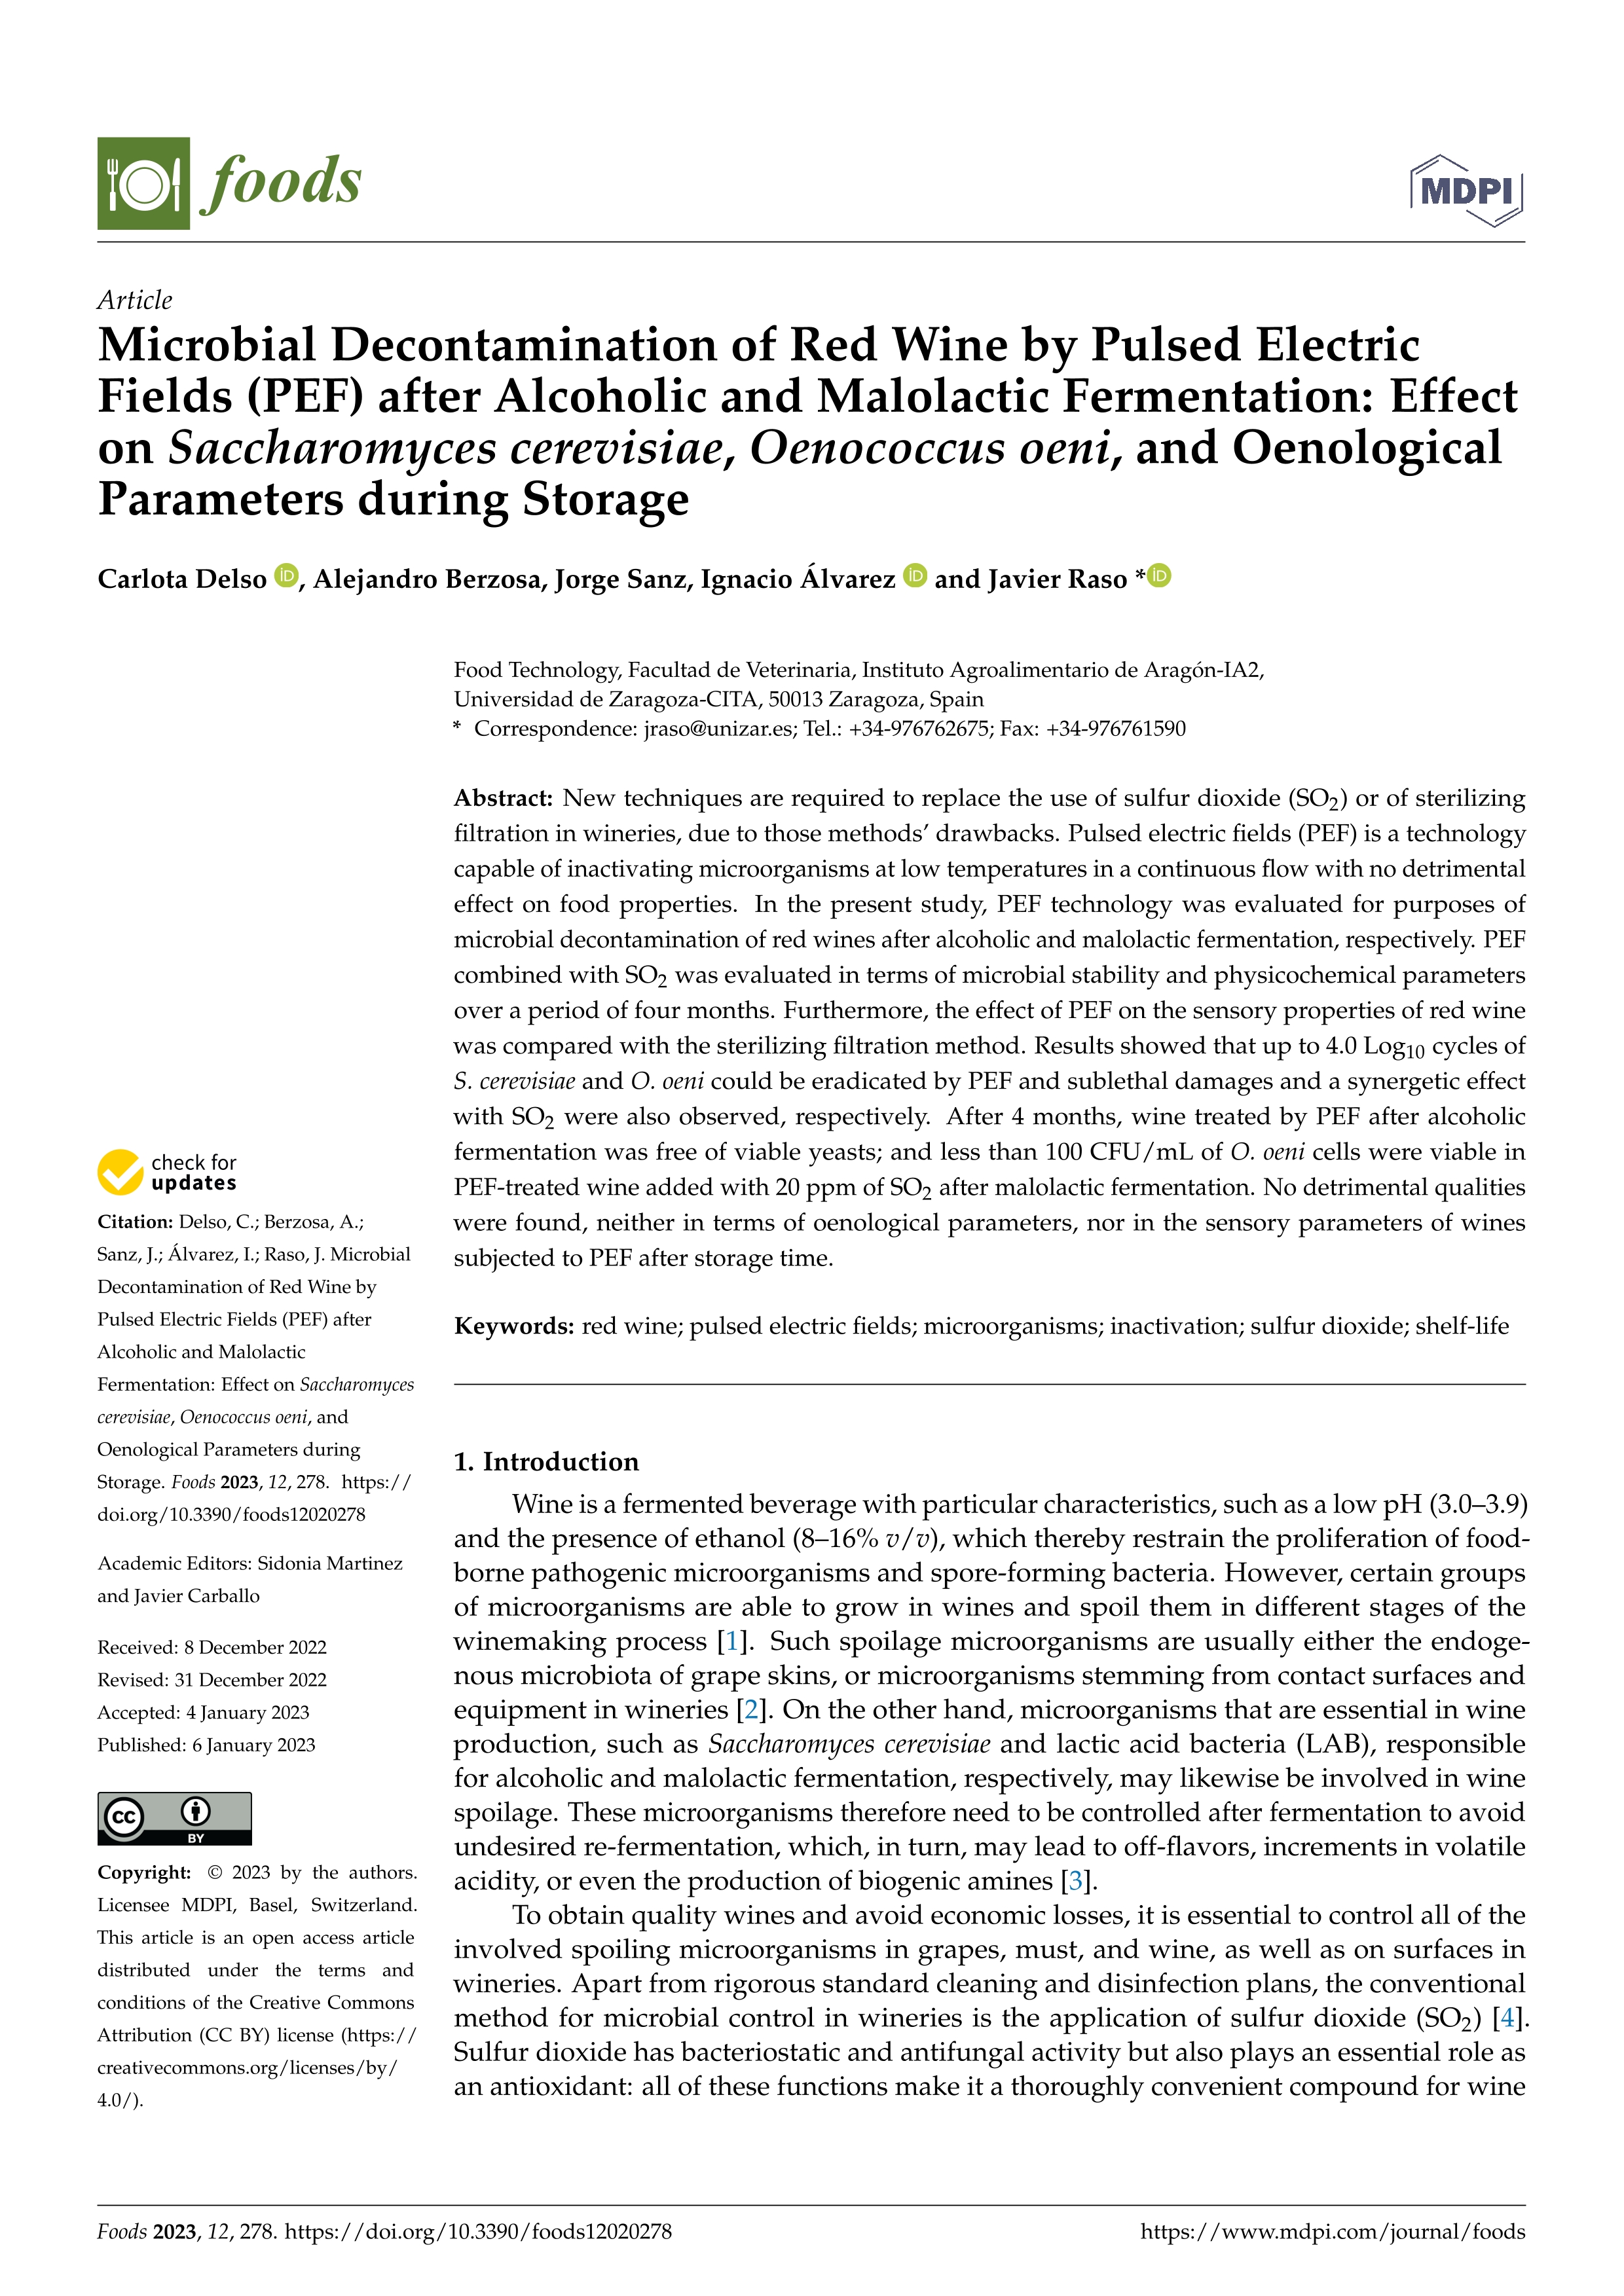 Microbial Decontamination of Red Wine by Pulsed Electric Fields (PEF) after Alcoholic and Malolactic Fermentation: Effect on Saccharomyces cerevisiae, Oenococcus oeni, and Oenological Parameters during Storage